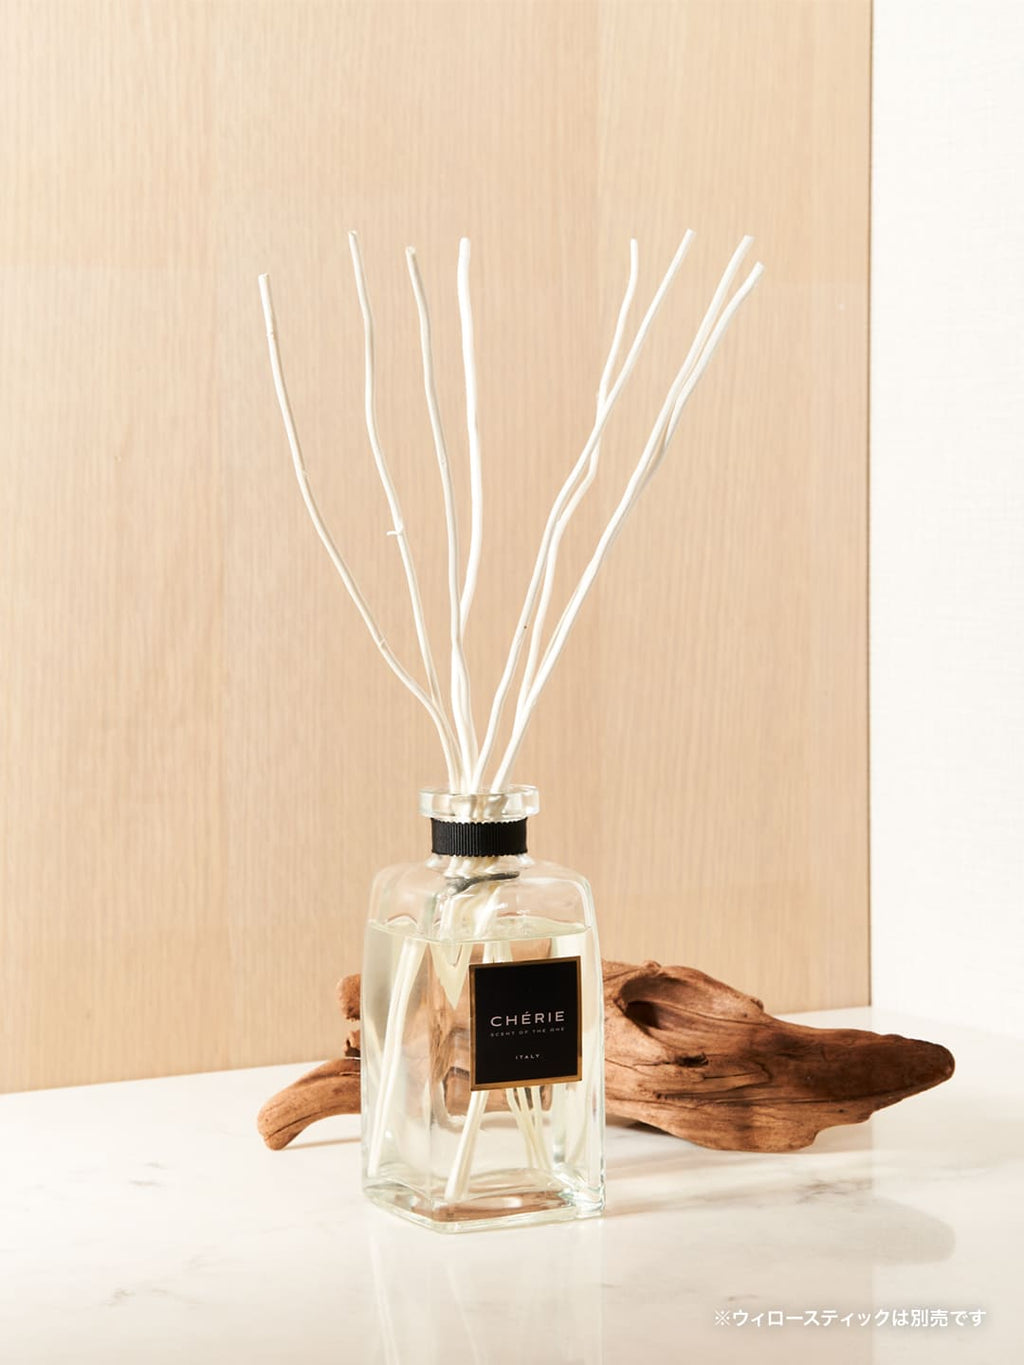 DIFFUSER “CHÉRIE”｜SCENT OF THE ONE